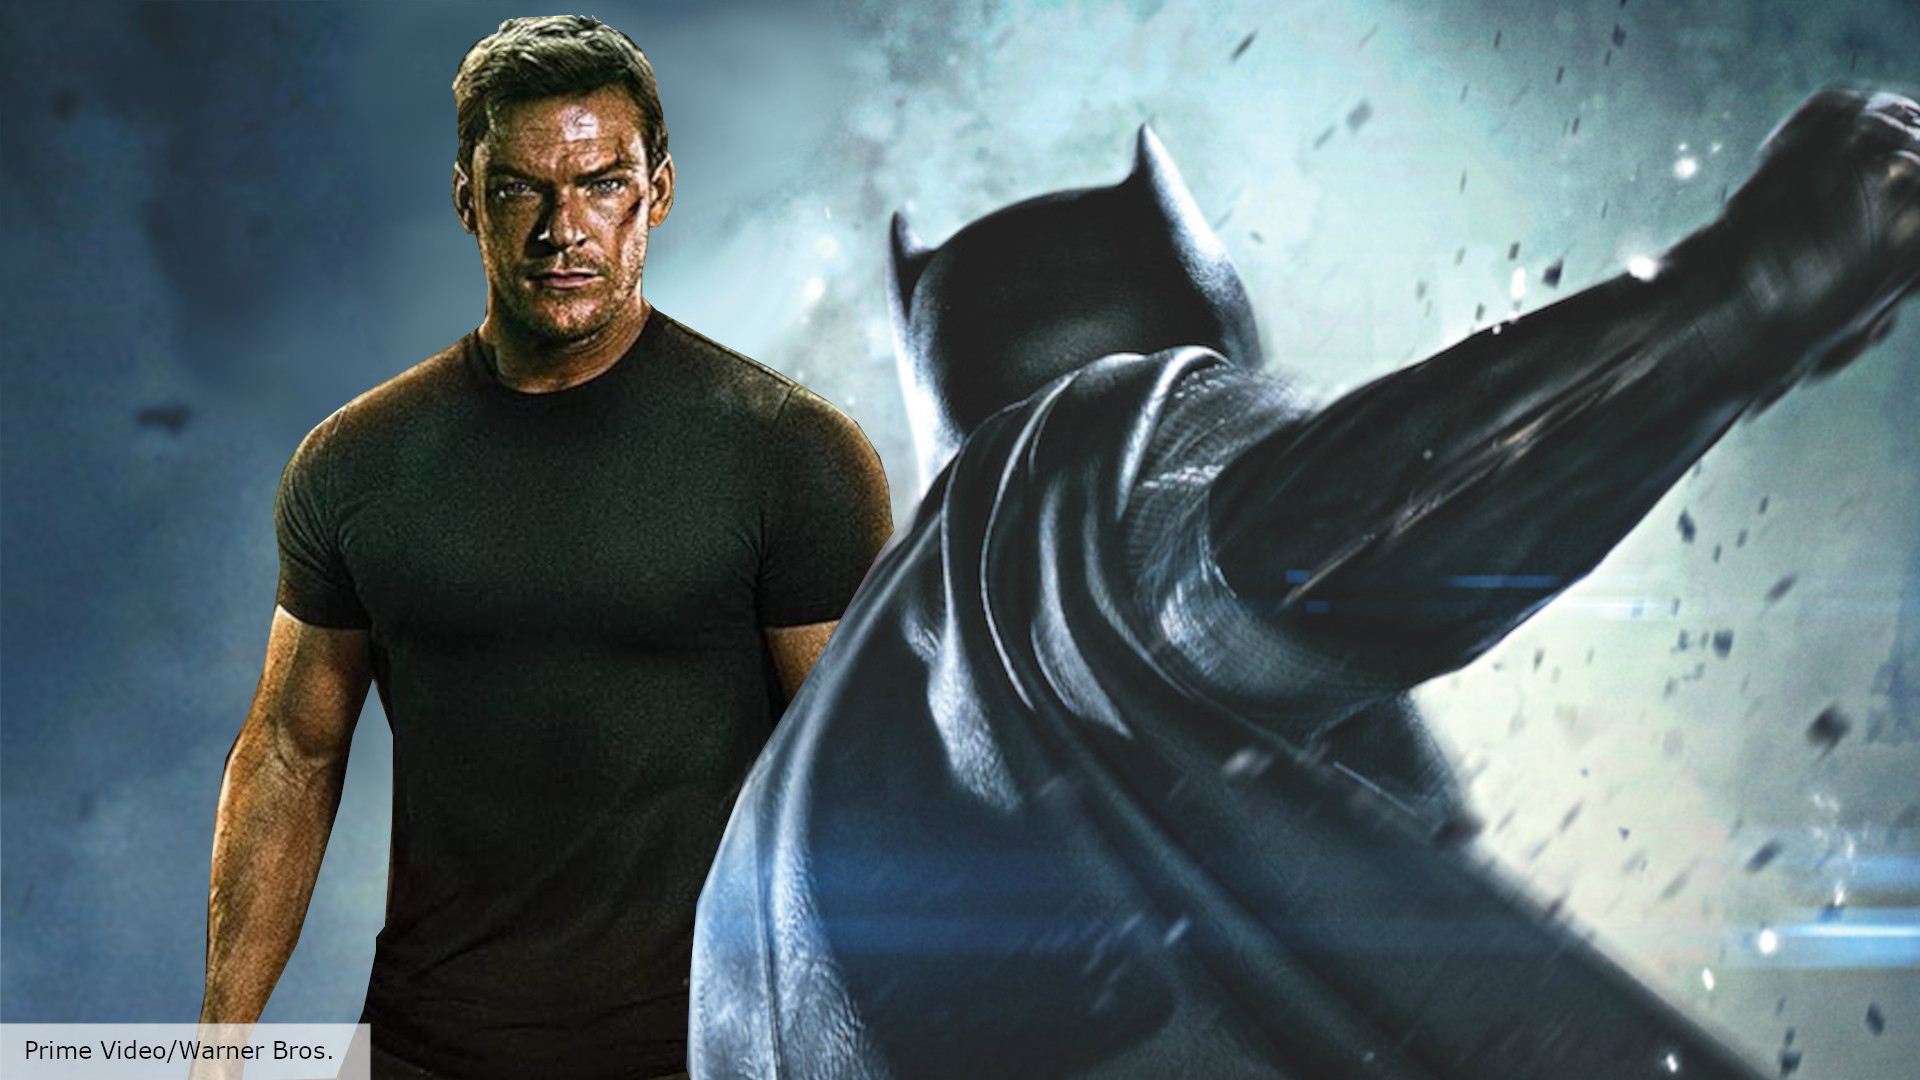 Alan Ritchson thinks Reacher could handle Batman in a fight